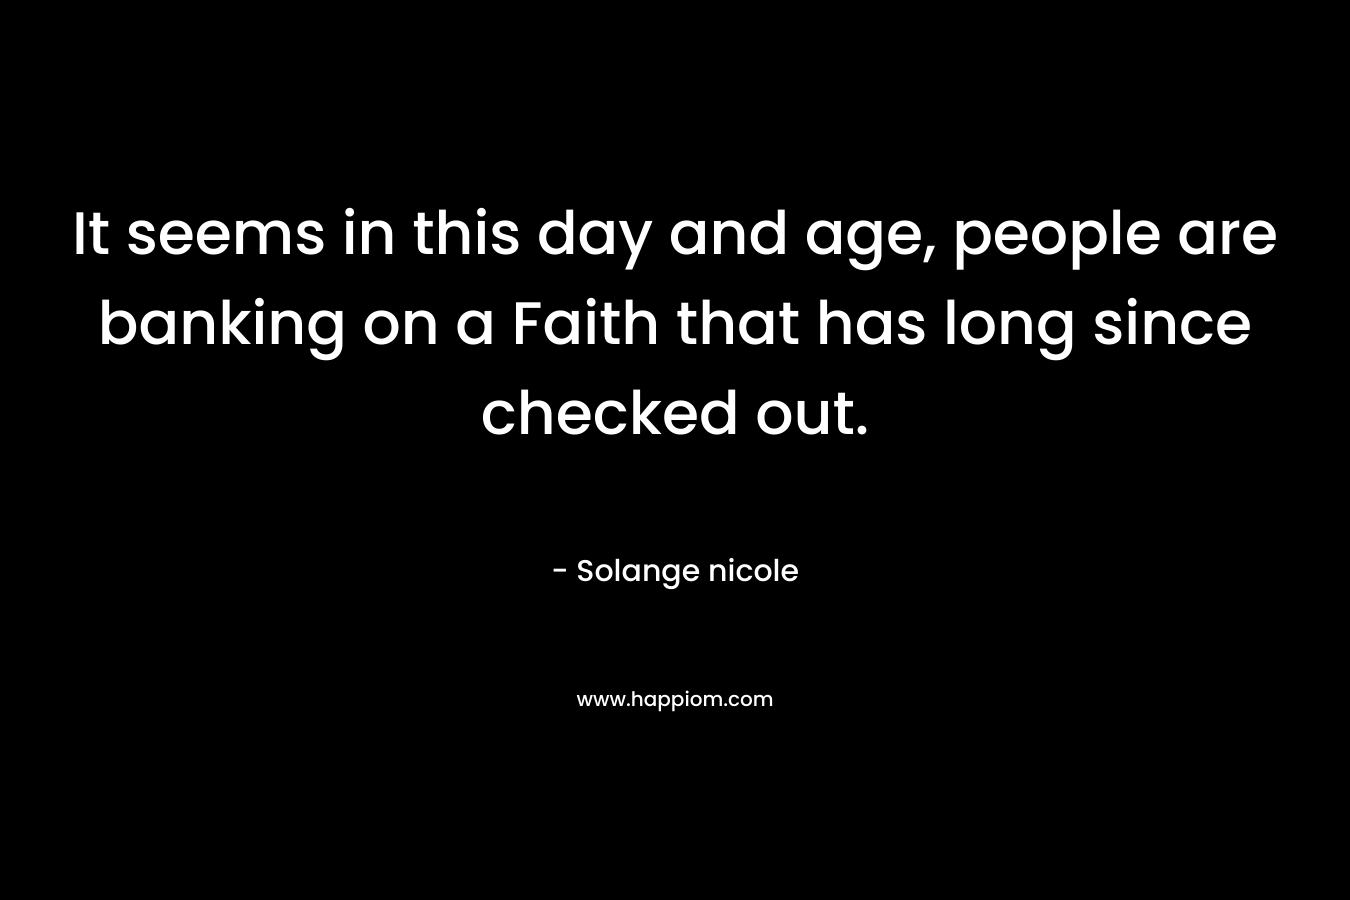 It seems in this day and age, people are banking on a Faith that has long since checked out. – Solange nicole